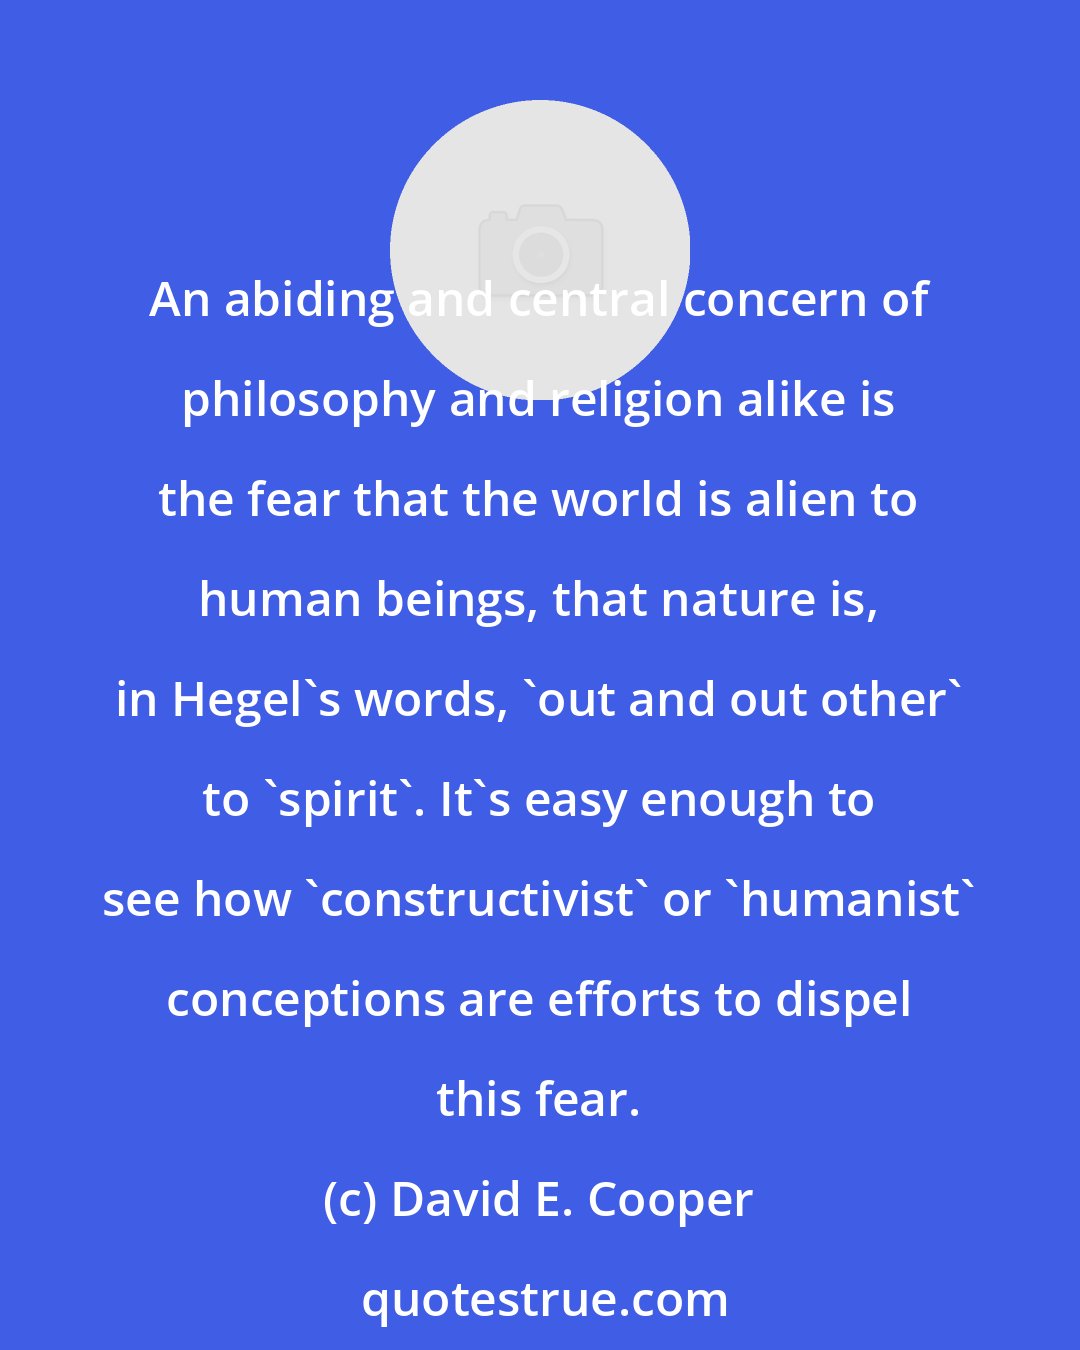 David E. Cooper: An abiding and central concern of philosophy and religion alike is the fear that the world is alien to human beings, that nature is, in Hegel's words, 'out and out other' to 'spirit'. It's easy enough to see how 'constructivist' or 'humanist' conceptions are efforts to dispel this fear.